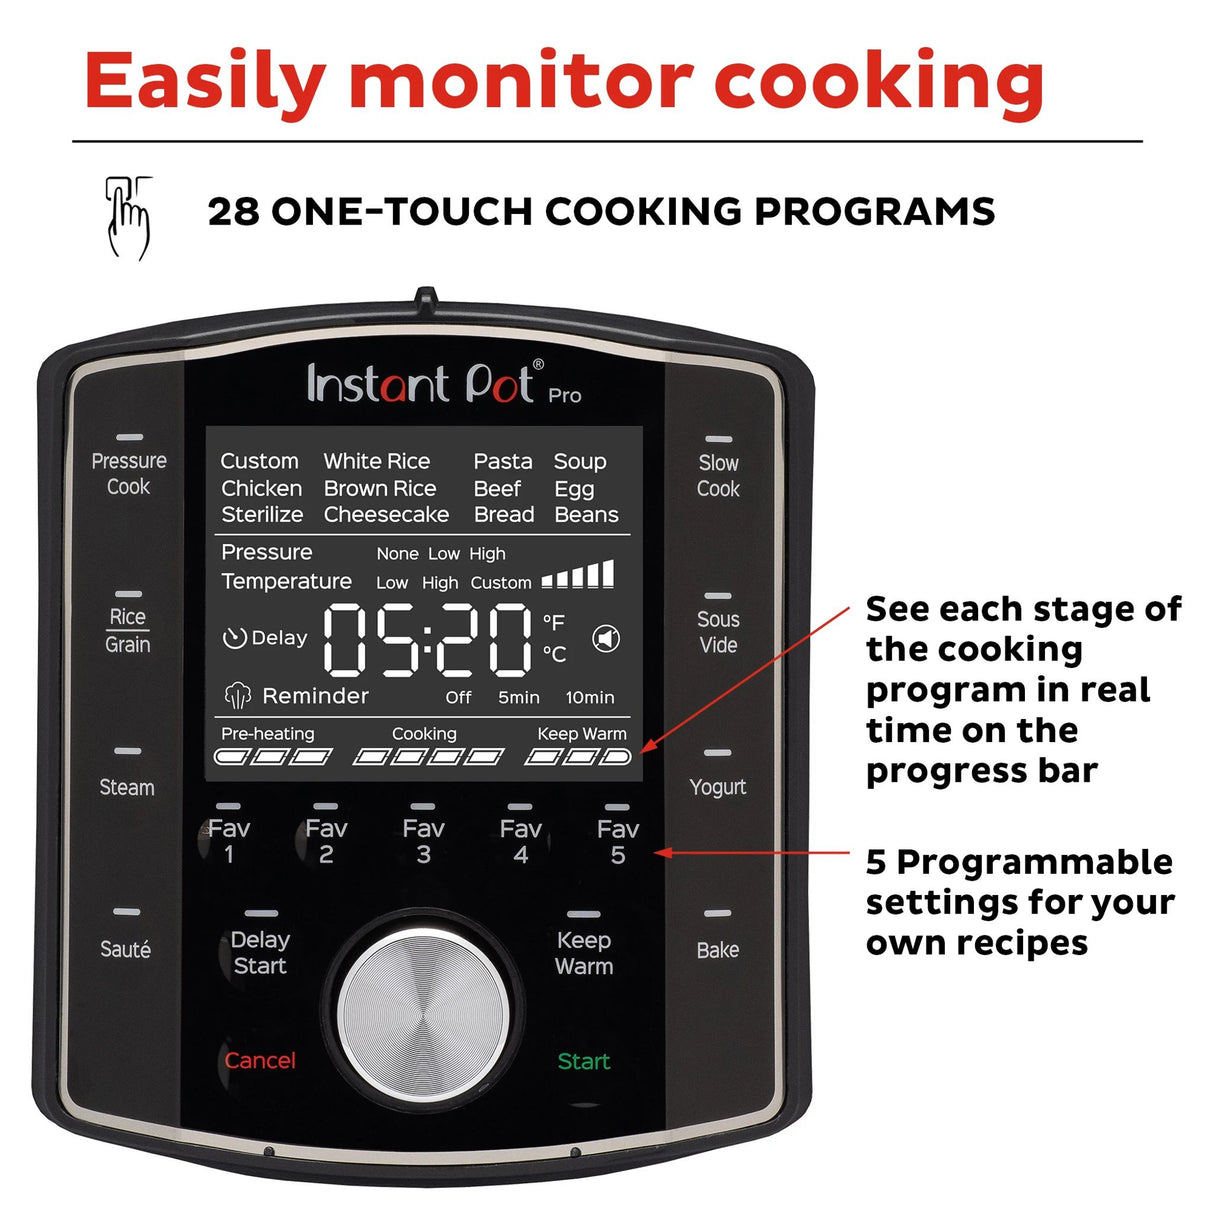  Instant Pot® Pro Multi-Use 6-qt Pressure Cooker with text Easily monitor cooking